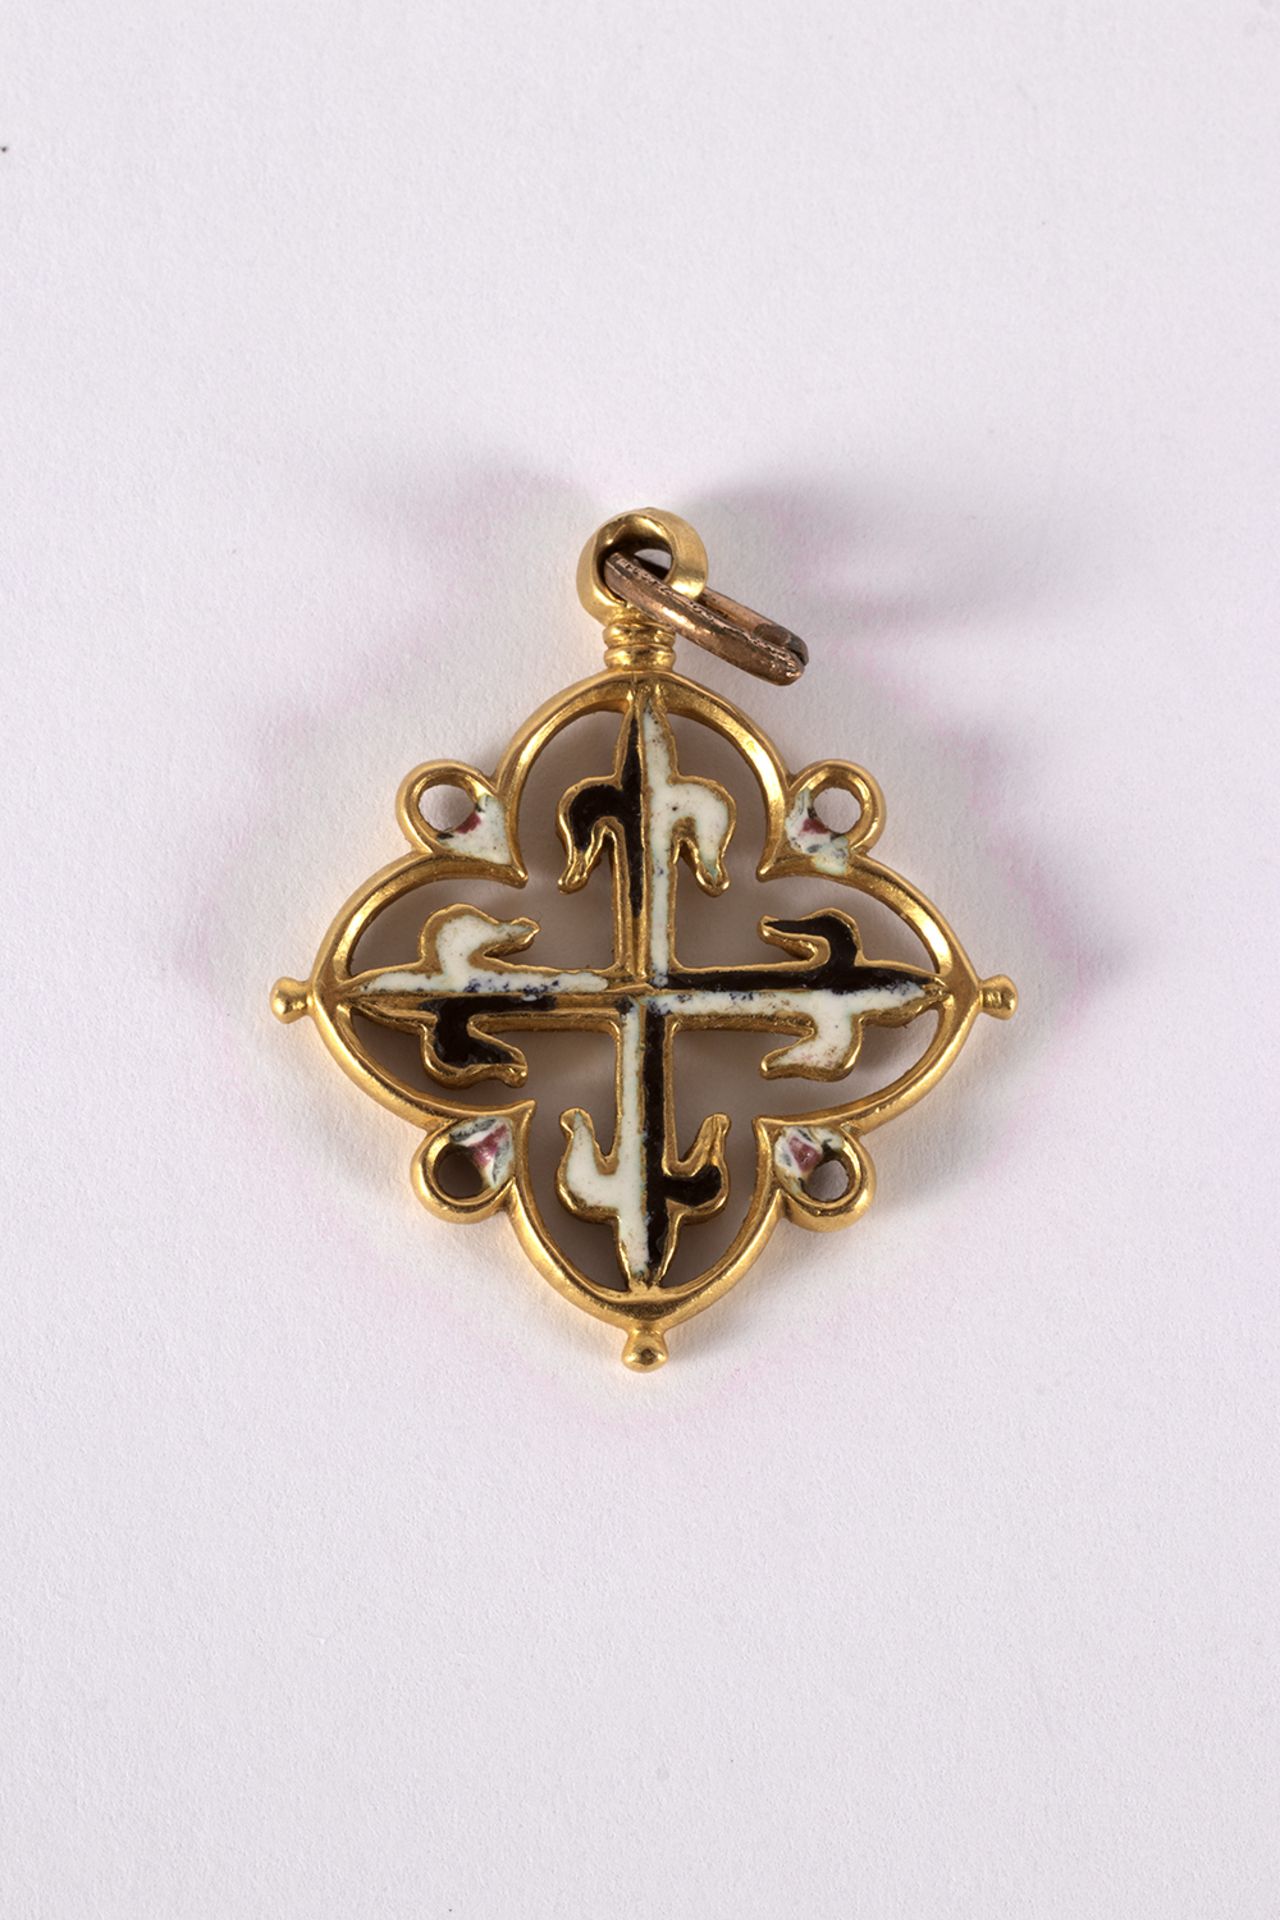 Mallorcan cross pendant in gold and enamels. - Image 2 of 2